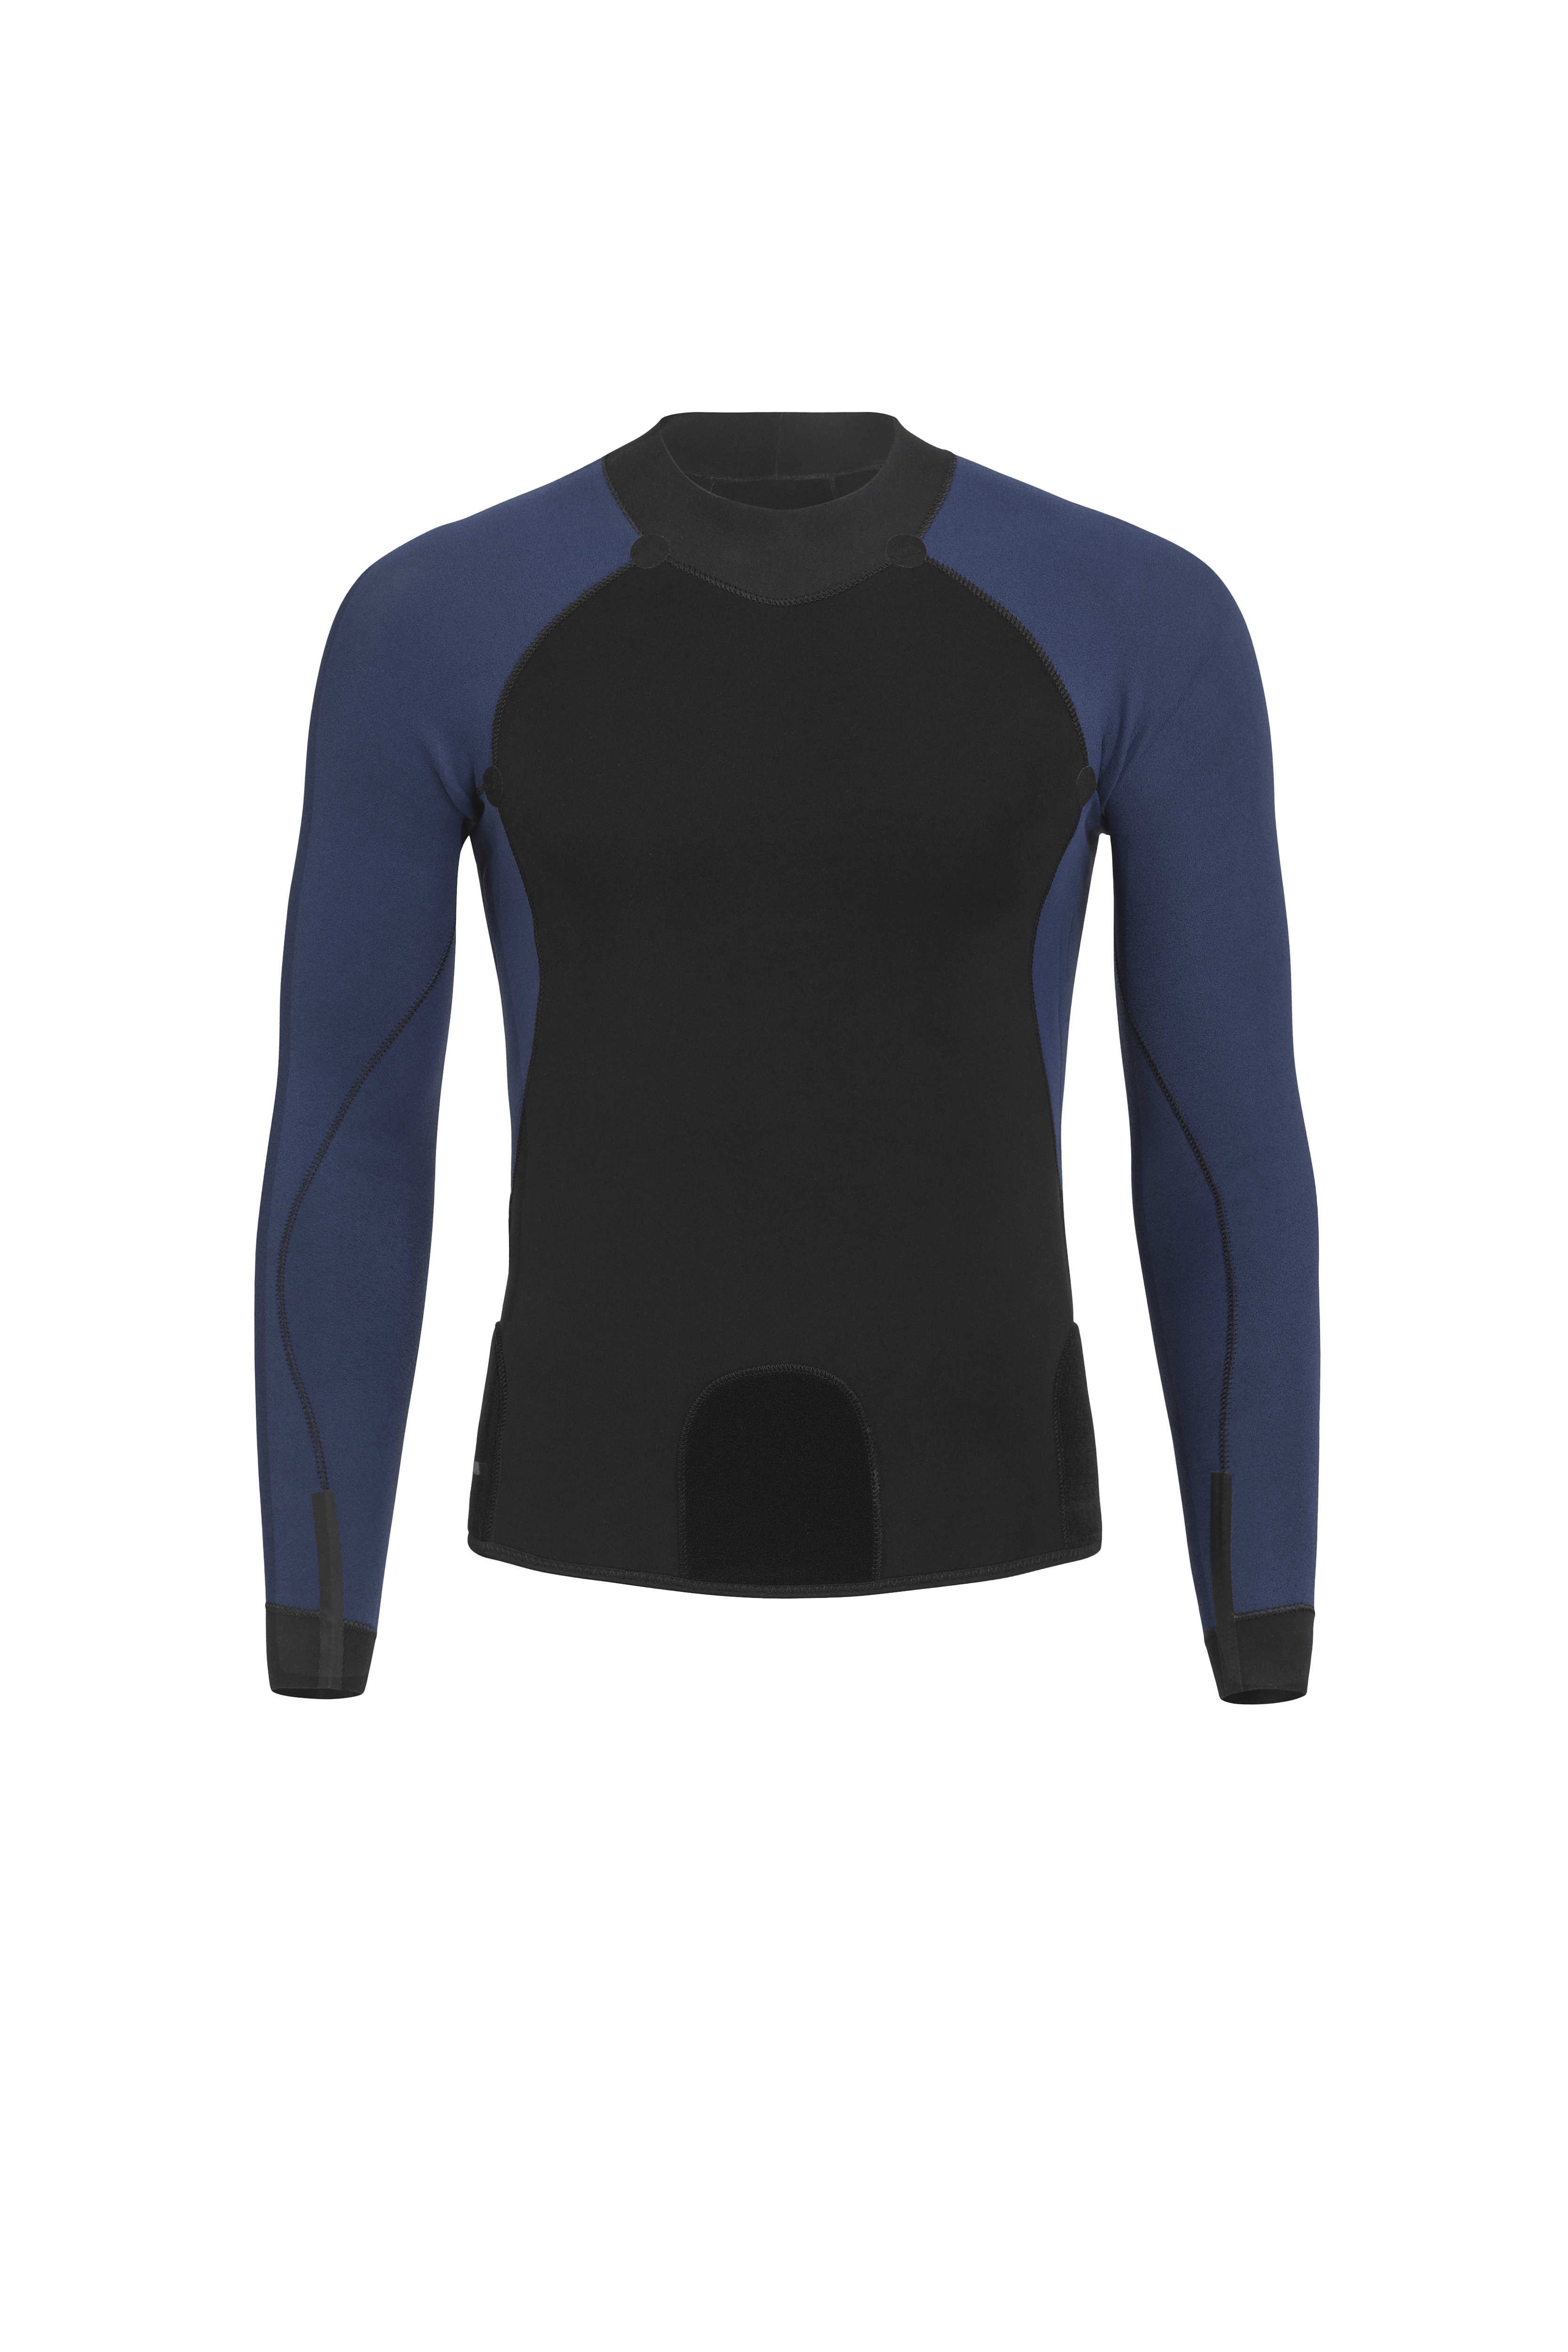 orca Ocean Swimming Openwater RS1 Top Mens Wetsuit